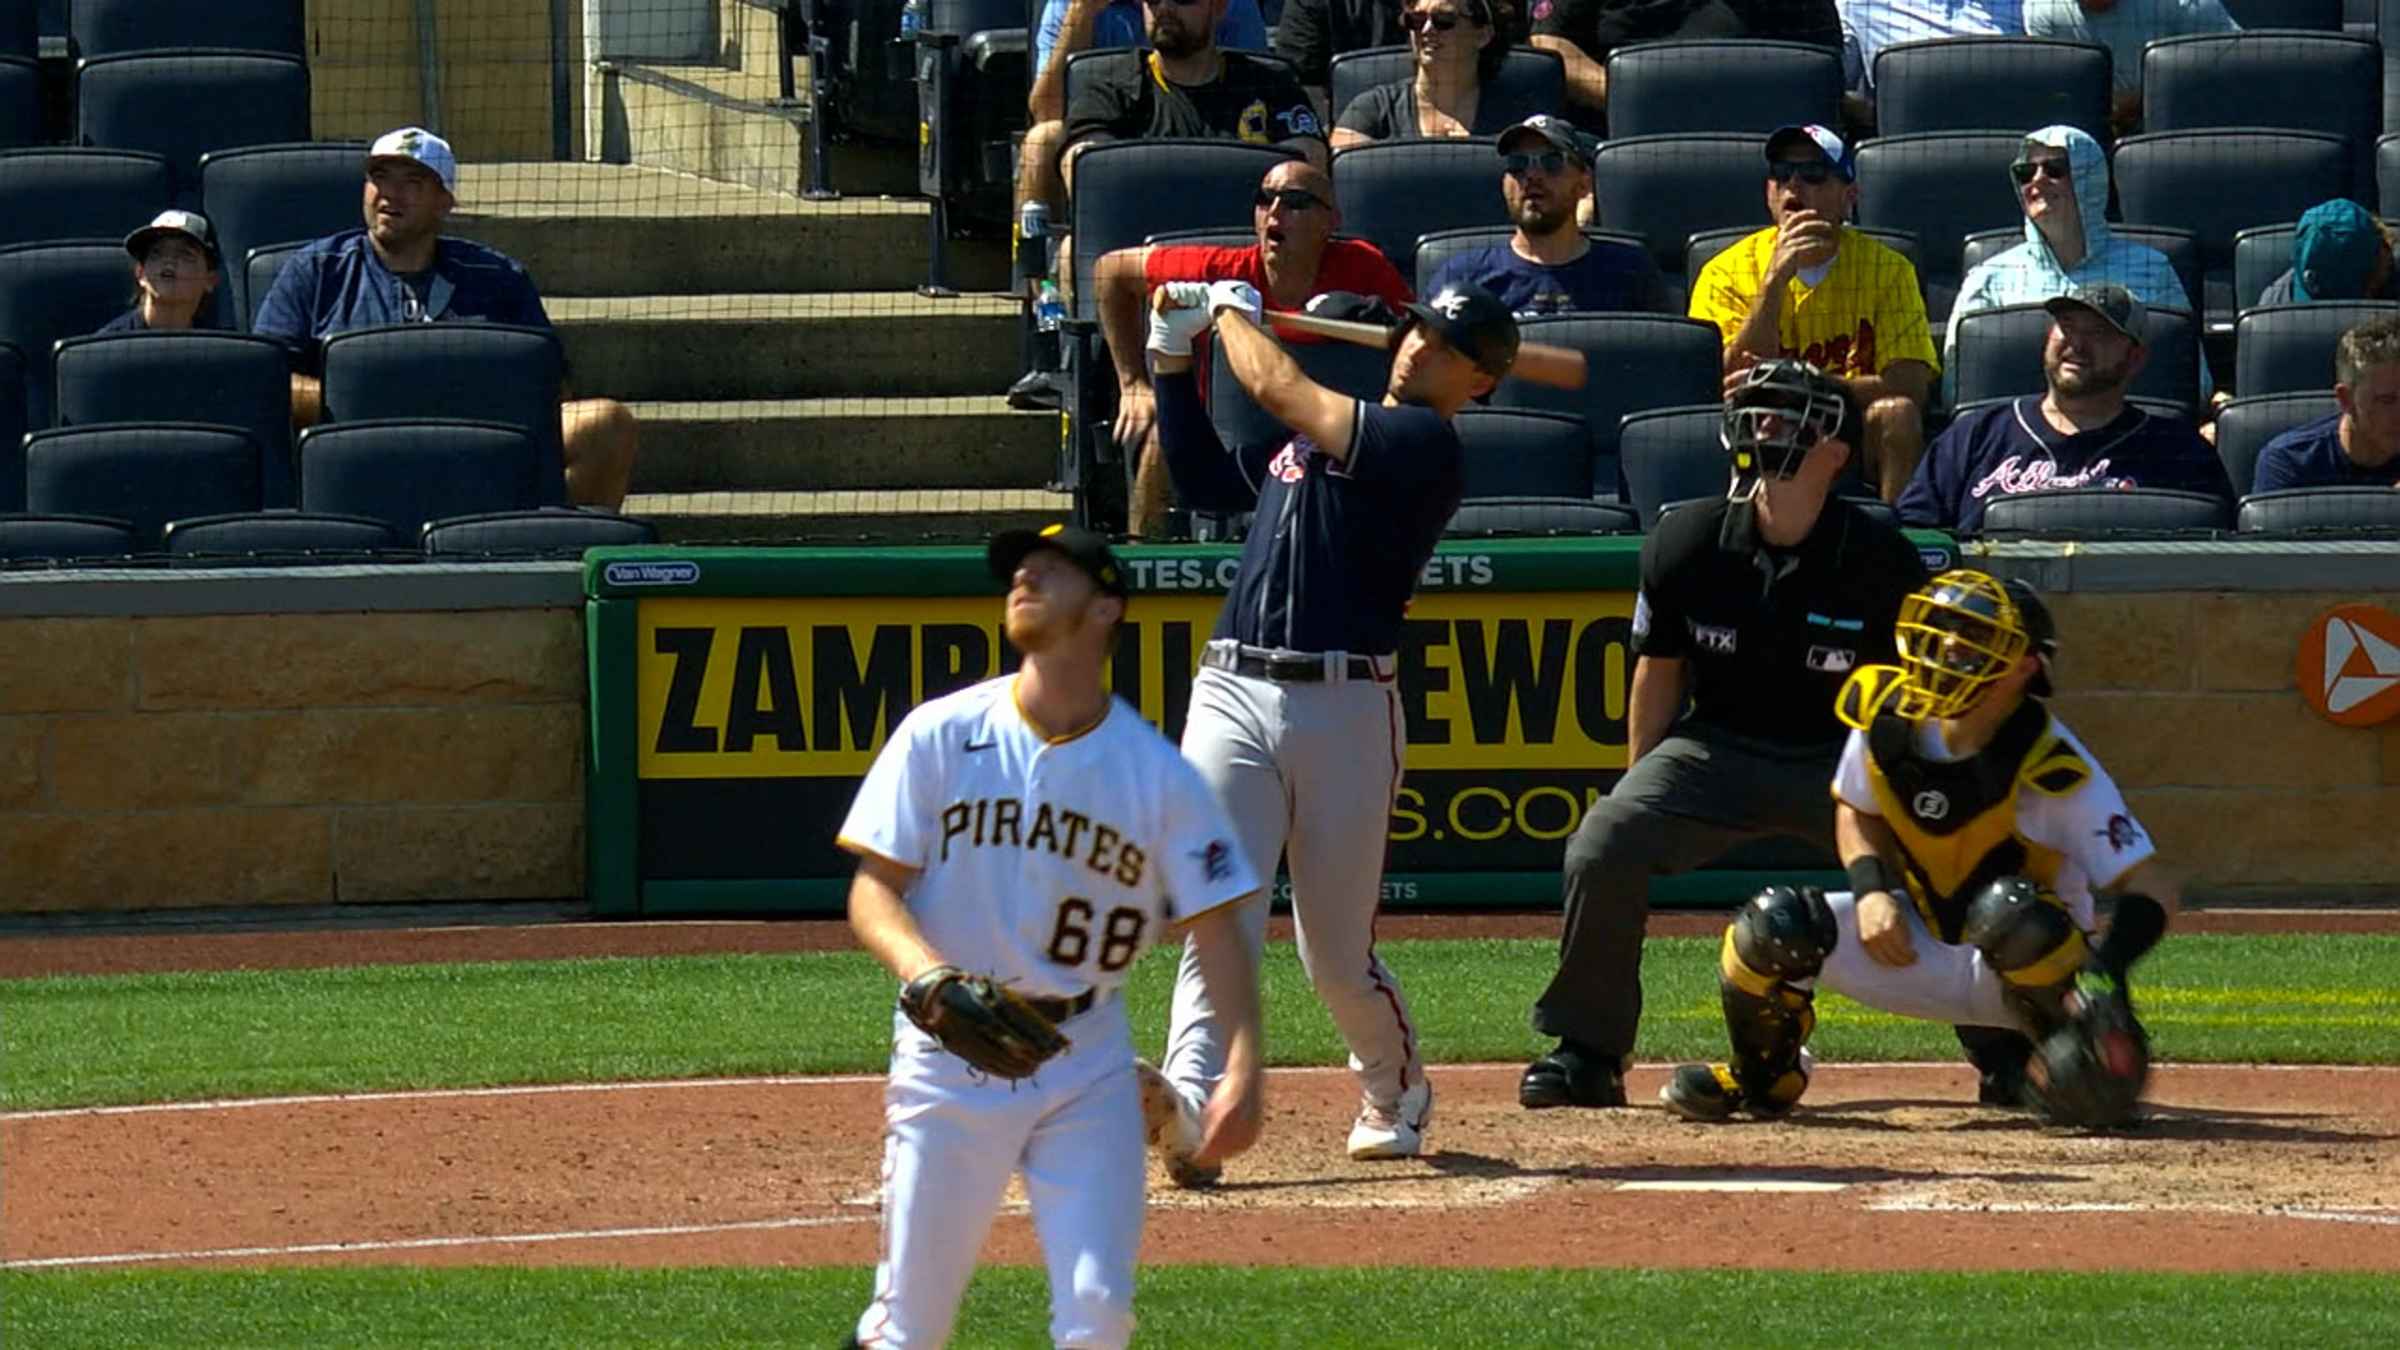 Matt Olson held his pose like a golfer after grand slam into Allegheny